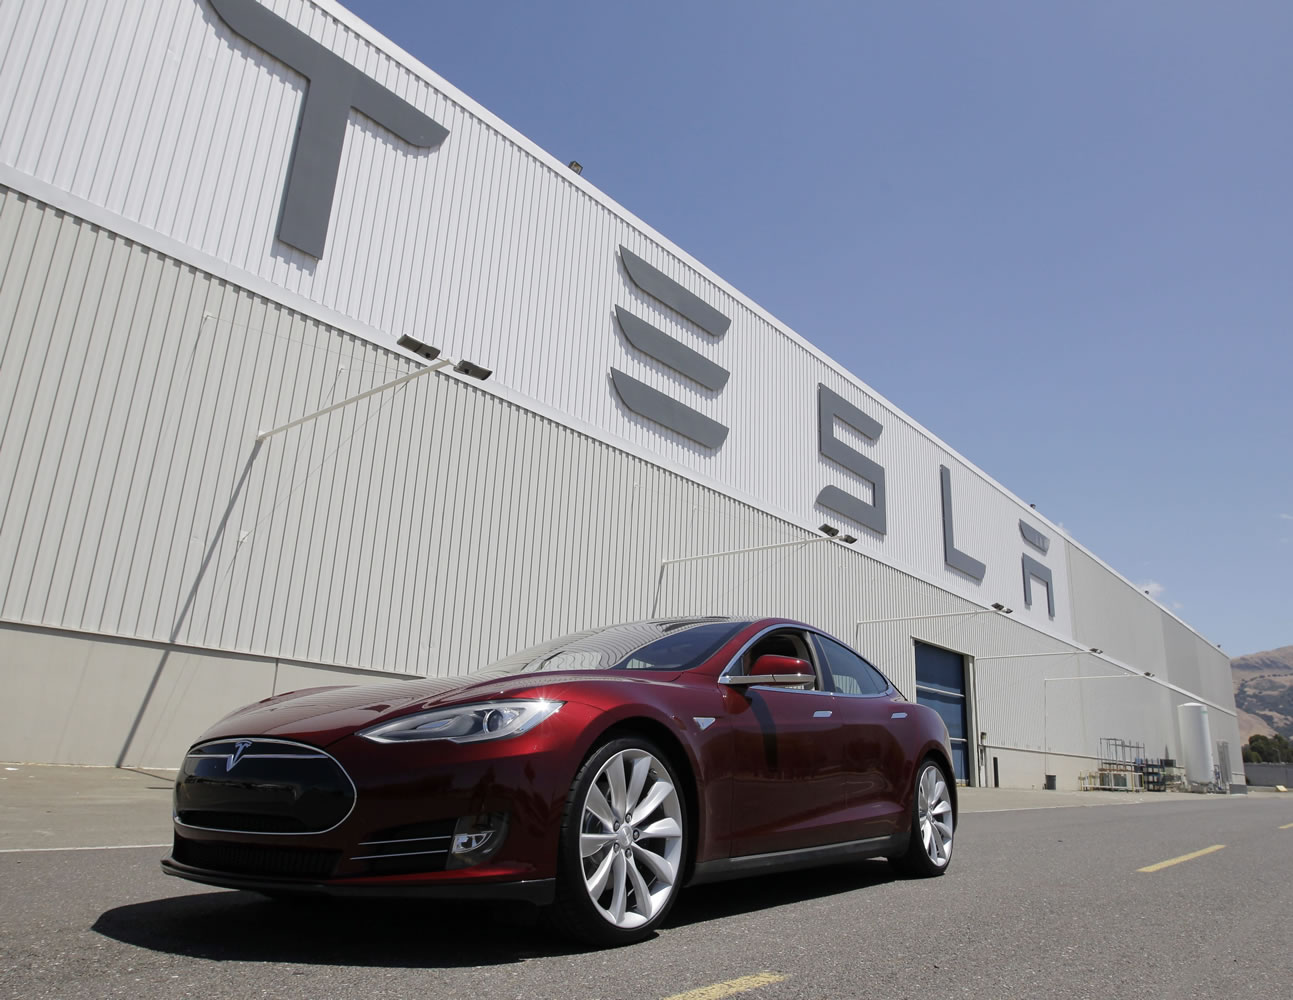 The Tesla Model S electric sedan is Consumer Reports' top pick in this year's automotive survey.